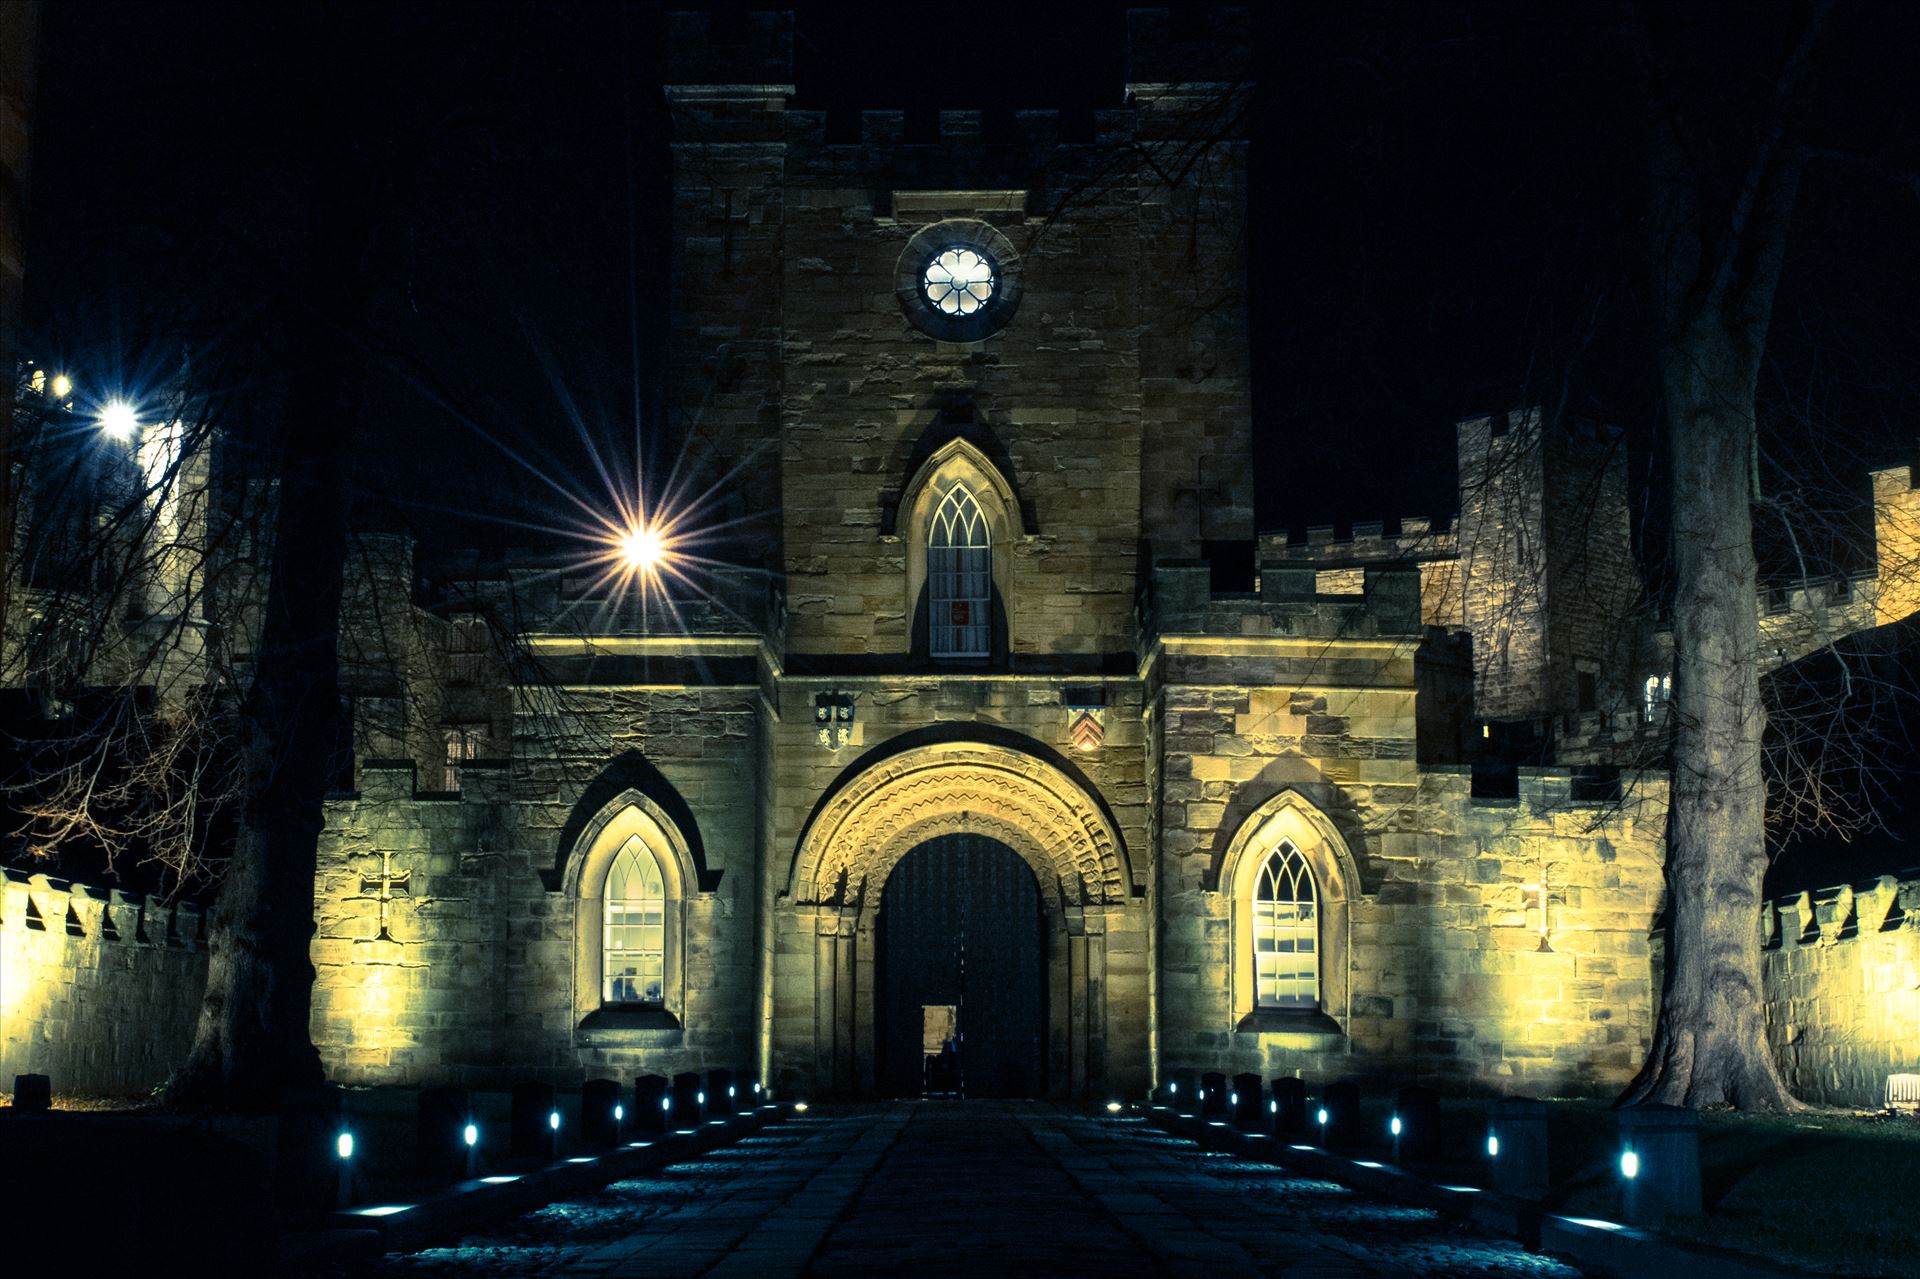 Durham City at Night - Taken on a cold night shoot in Durham City by AJ Stoves Photography